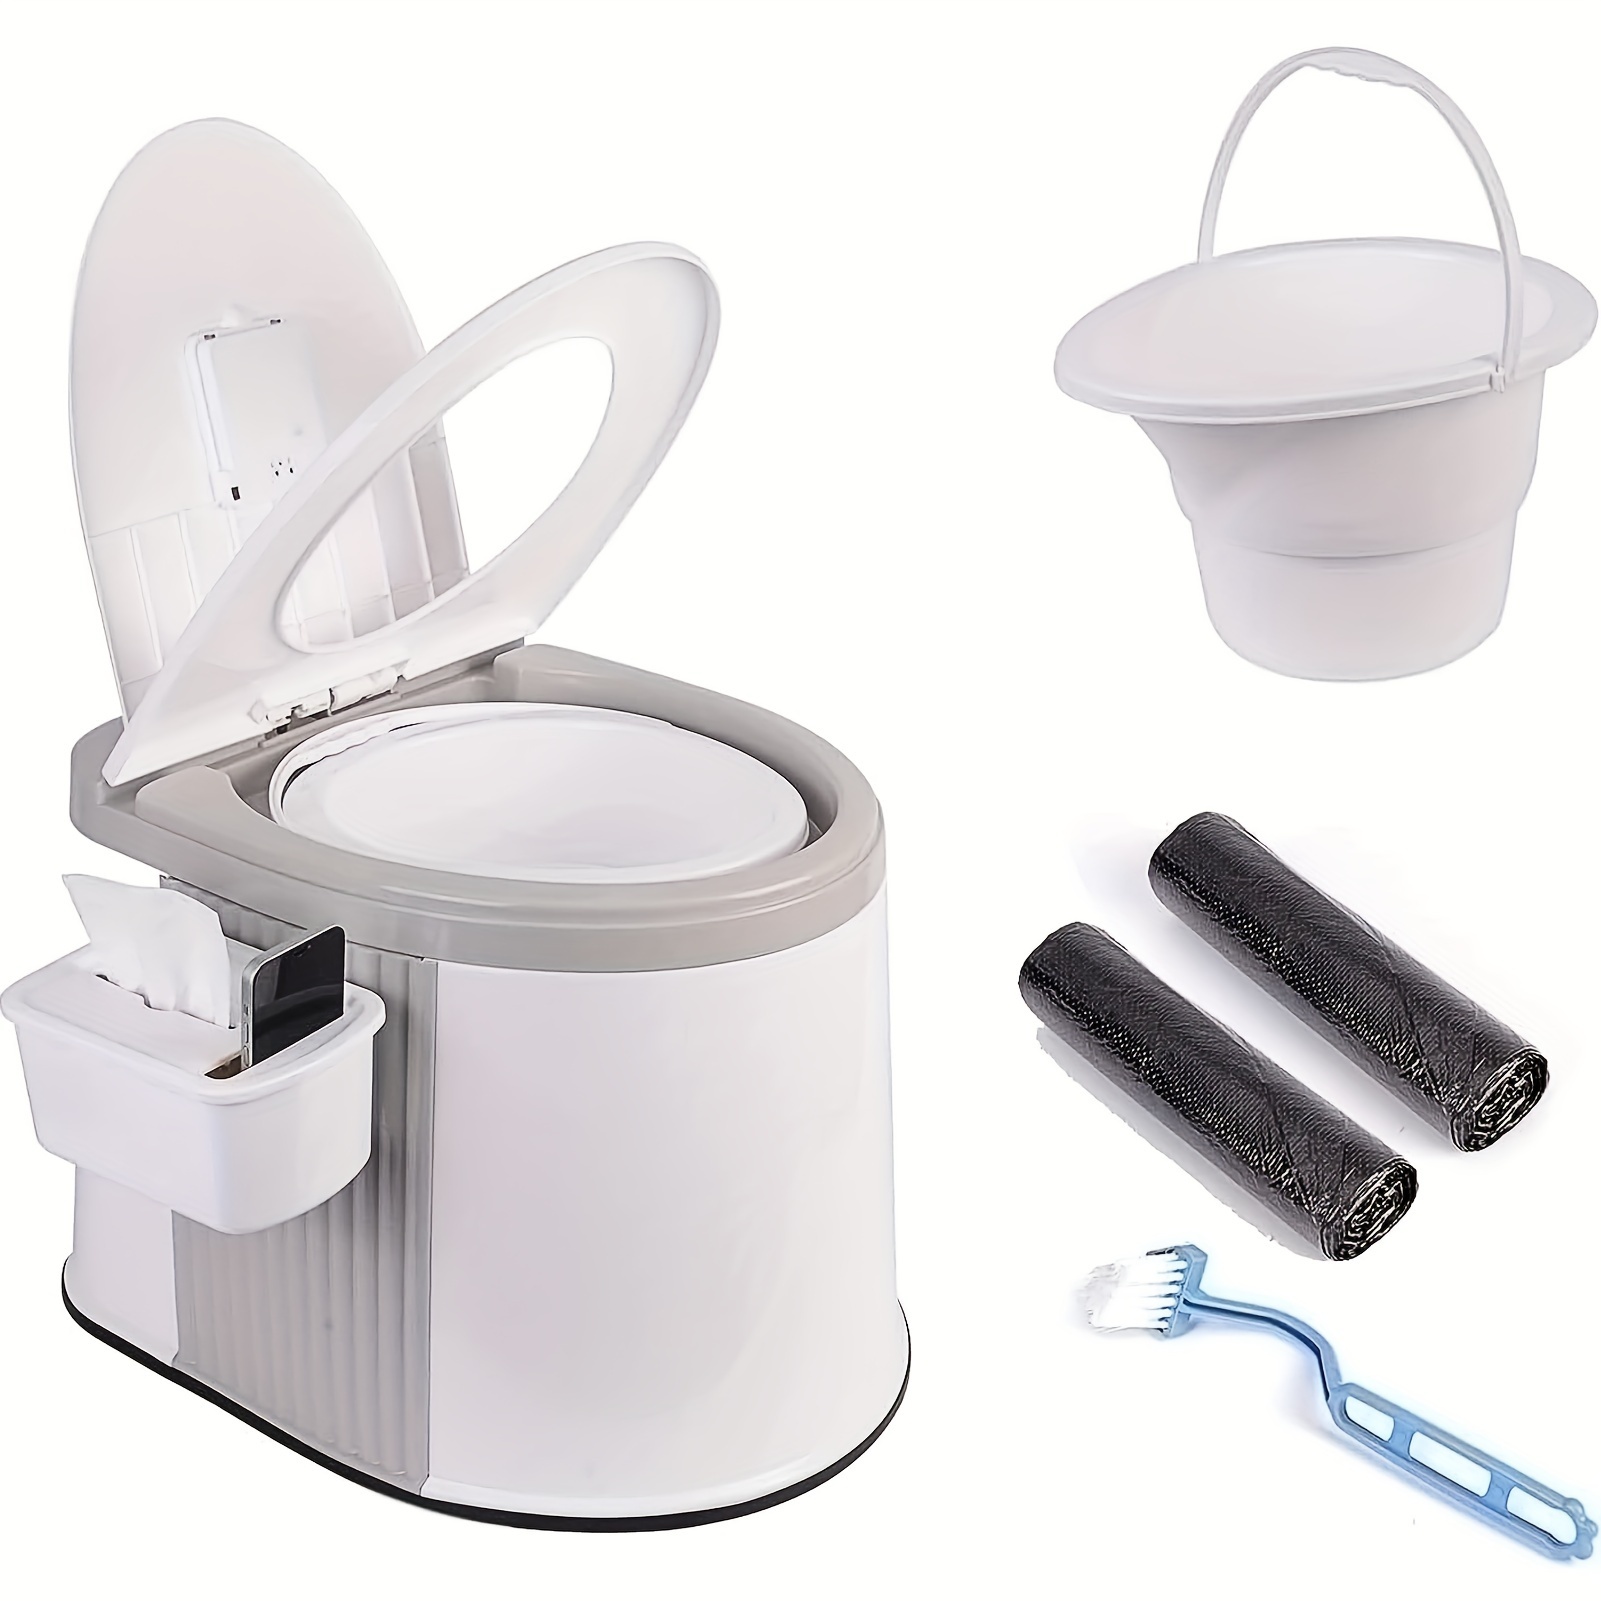 

Portable Camping Toilet With Lid And Paper Holder, Easy To Clean, Ideal For Car, Camping, Hiking, Fishing And Van